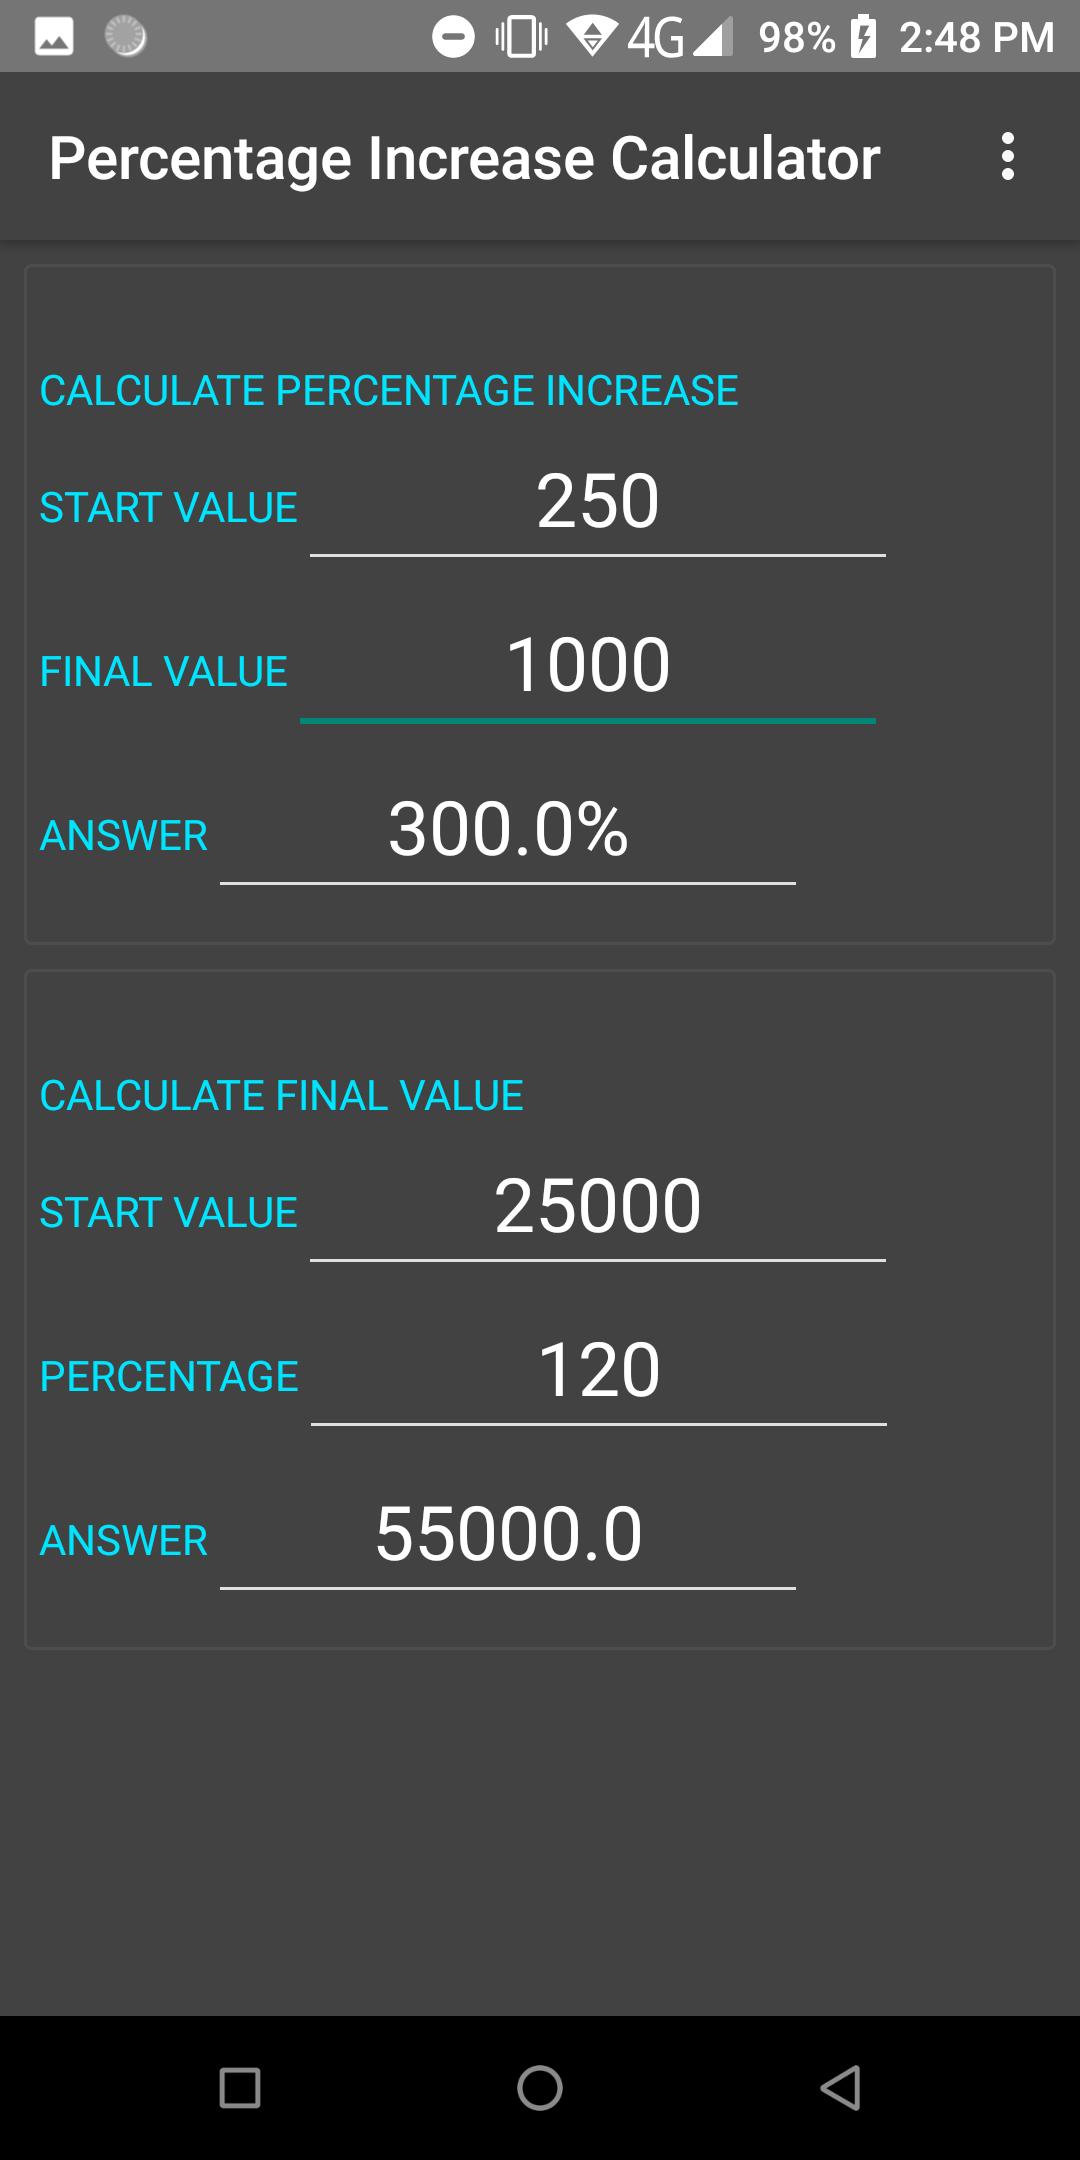 Percentage Increase Calculator for Android - APK Download